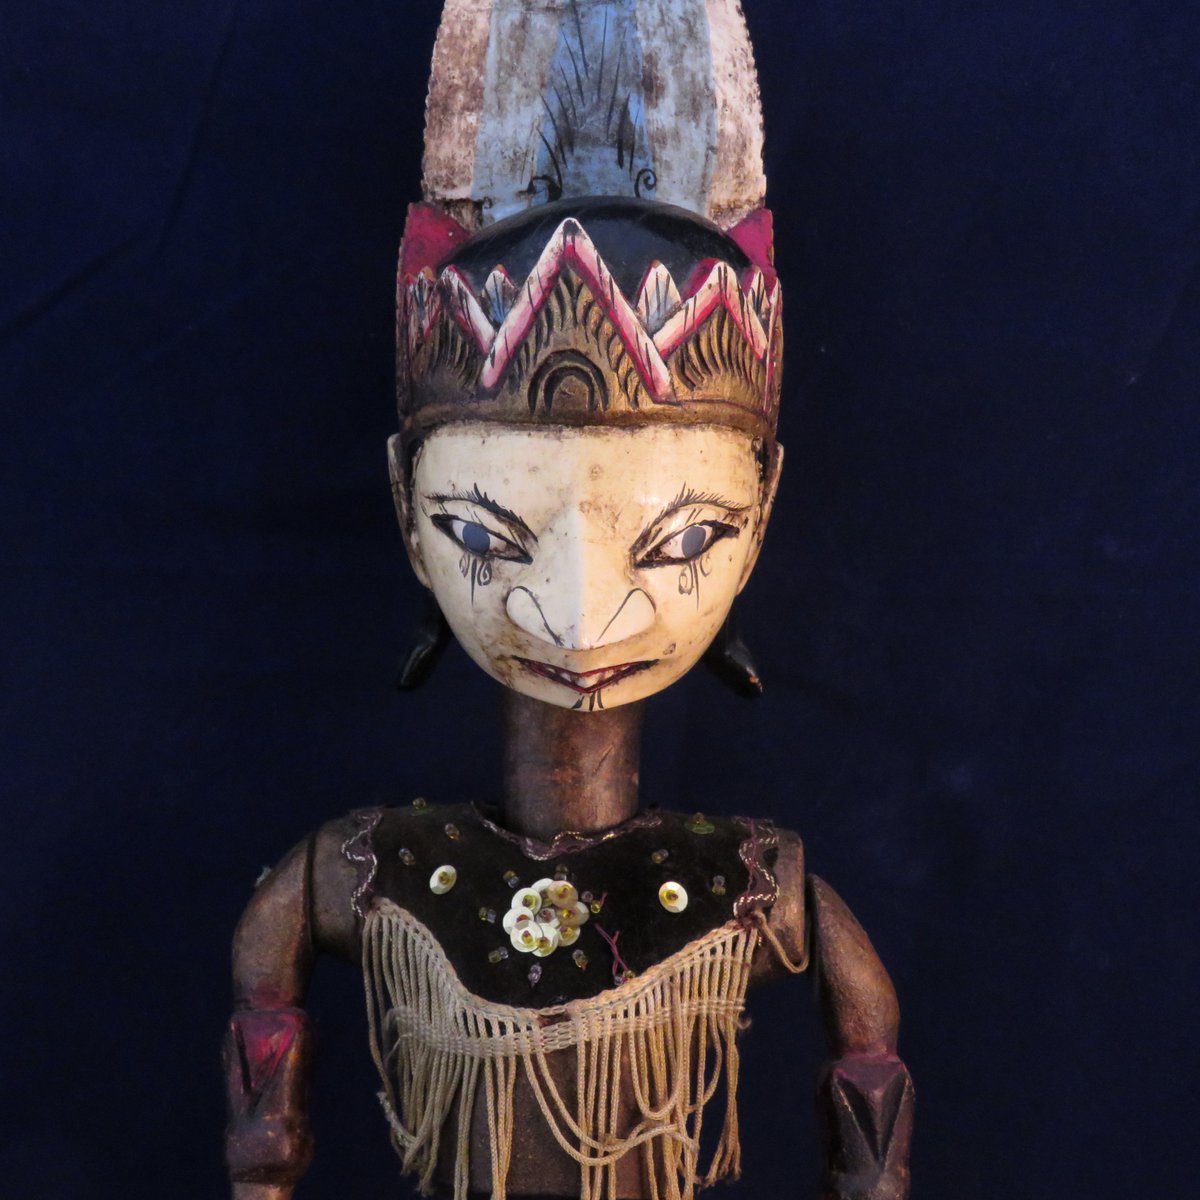 Celebrate Asian American and Pacific Islander Heritage Month this May through some special objects in our collection! 🎉 Today, we will delve into this rod puppet from Indonesia. 🤹 Some wear a long skirt, have blue eyes, and facial markings or tattoos.